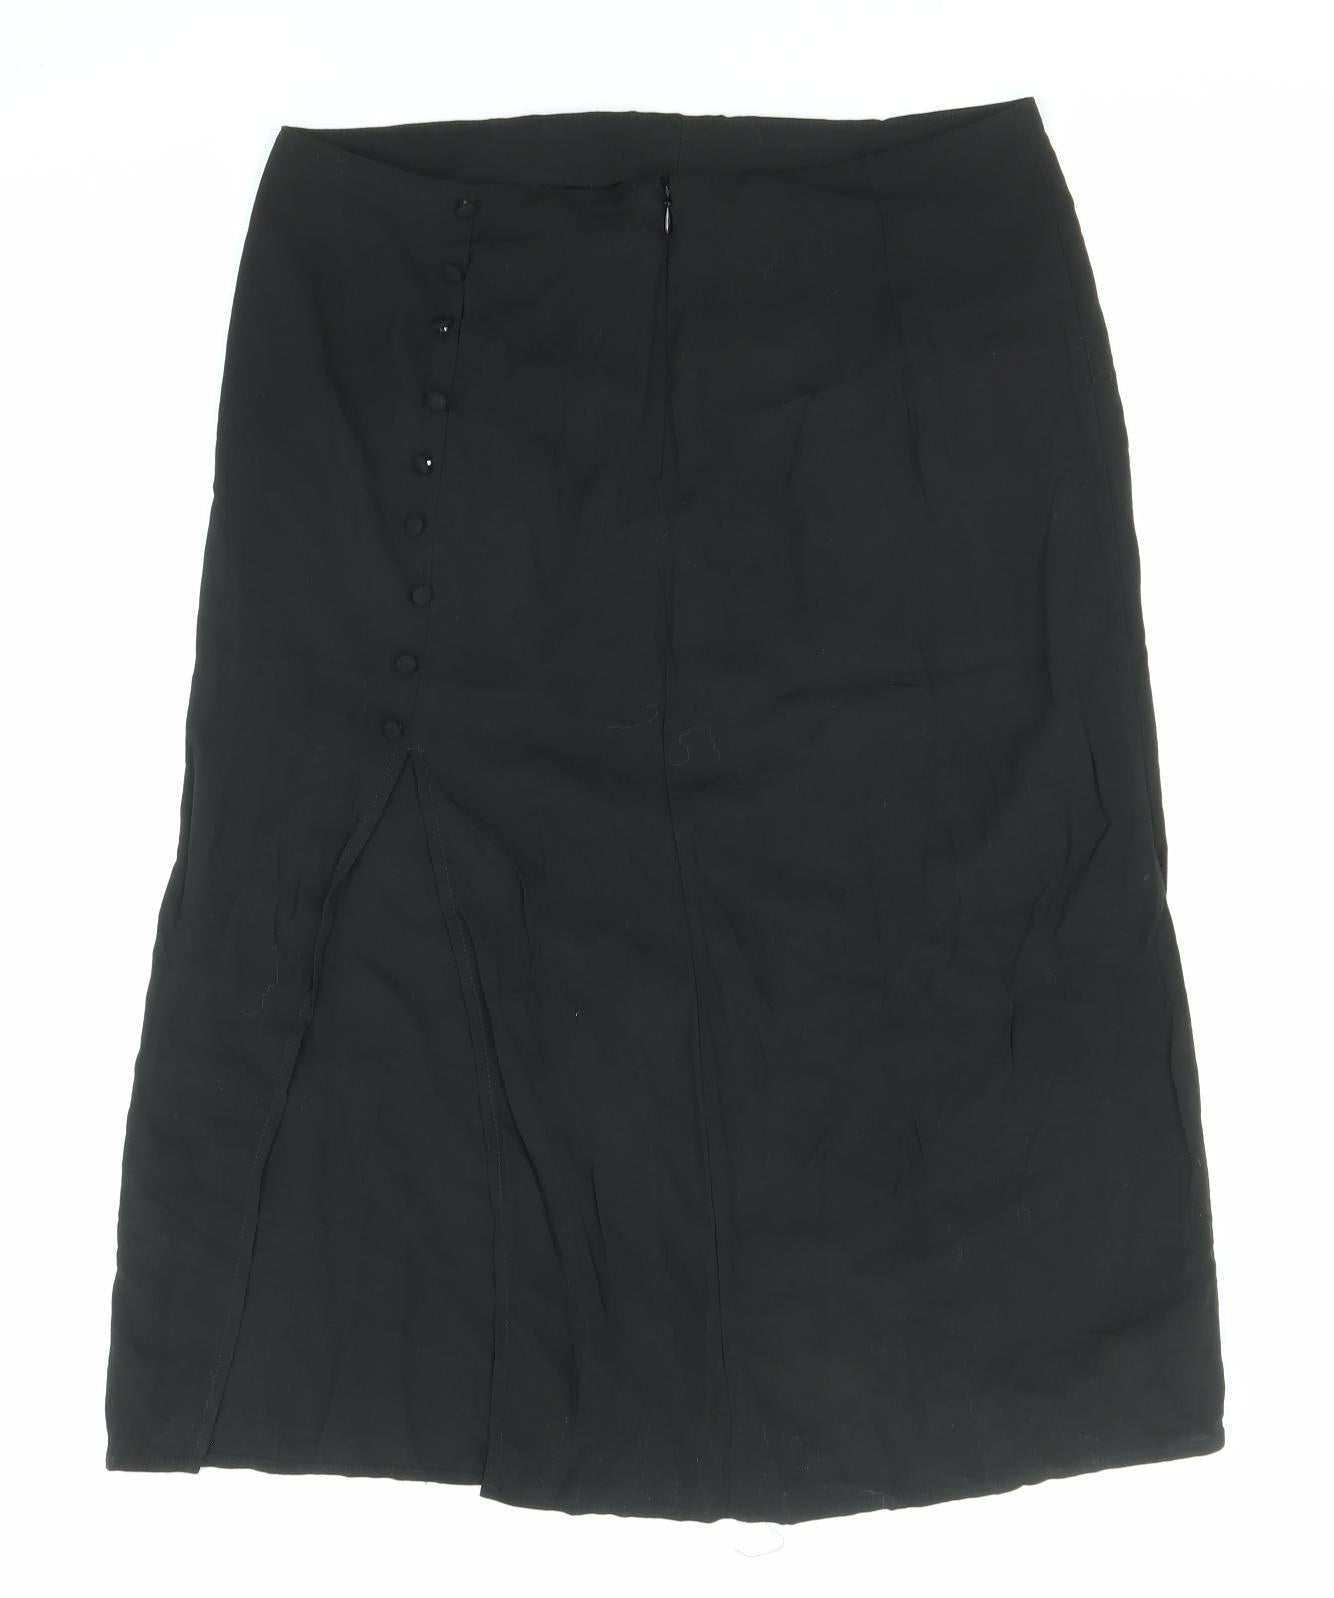 Divided by H&M Womens Black Viscose A-Line Skirt Size 14 Zip